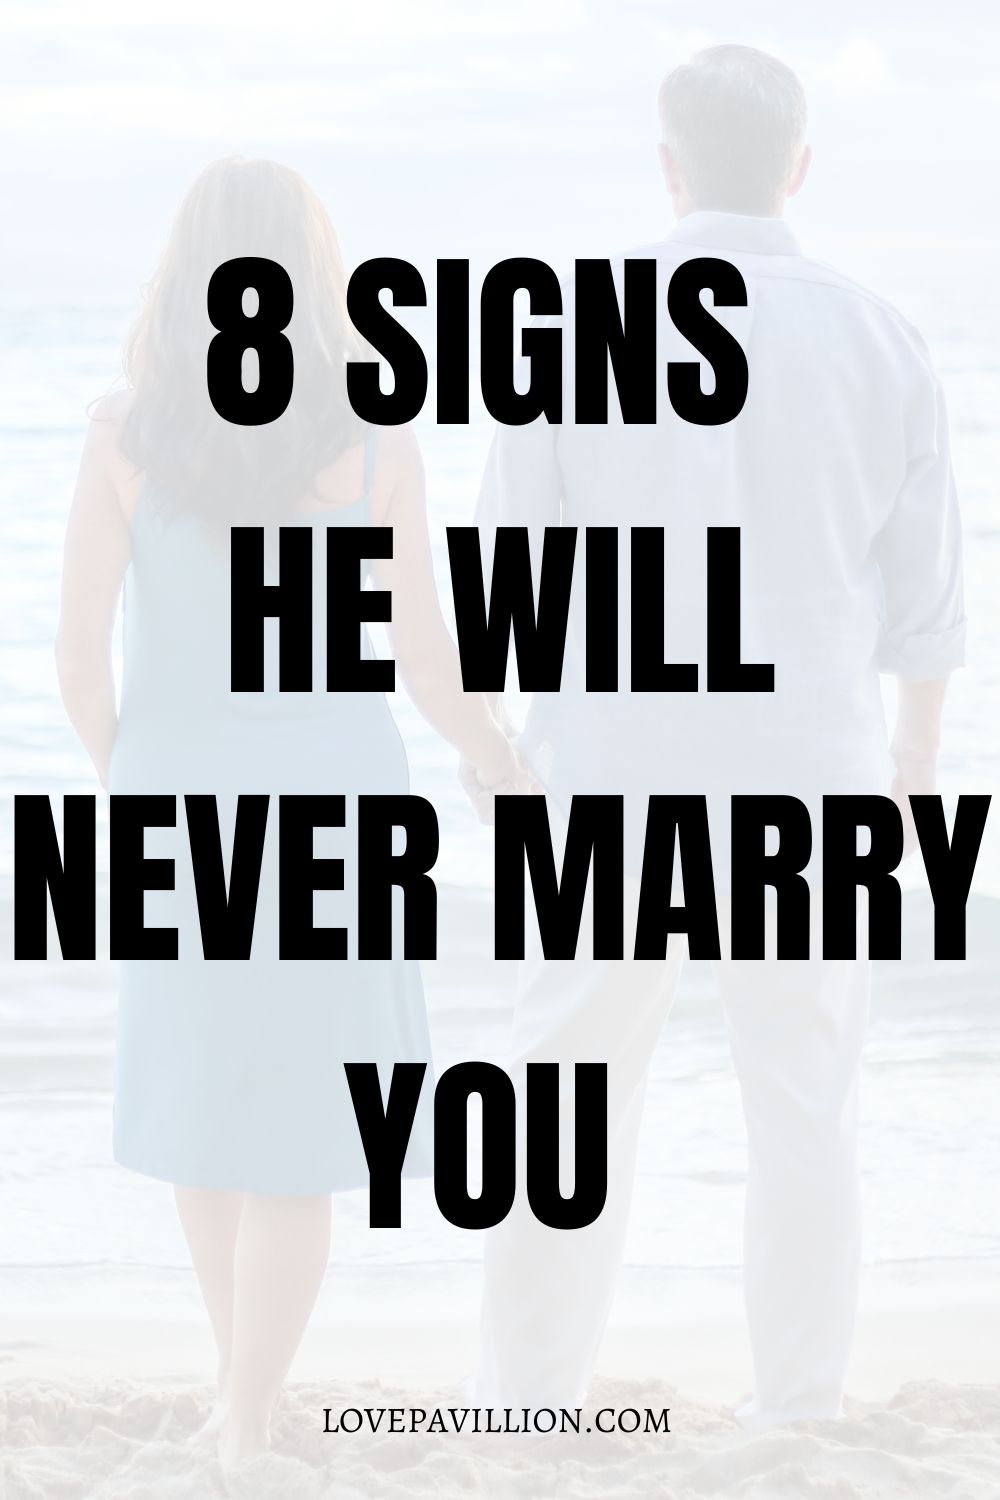 8 Signs He Will Never Marry You - Love Pavillion